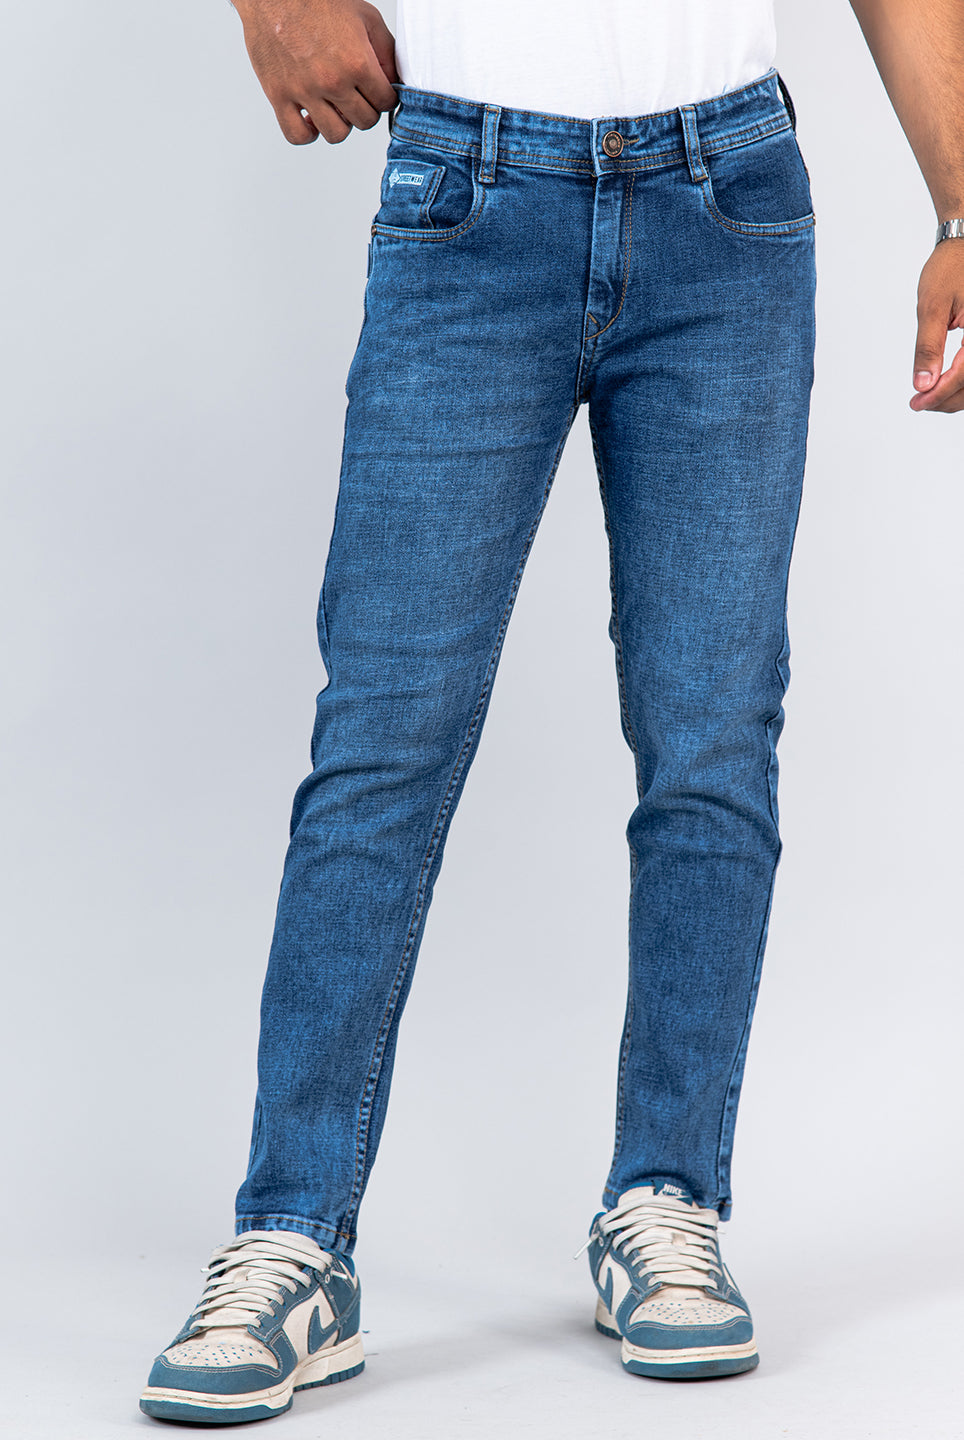 ankle length jeans